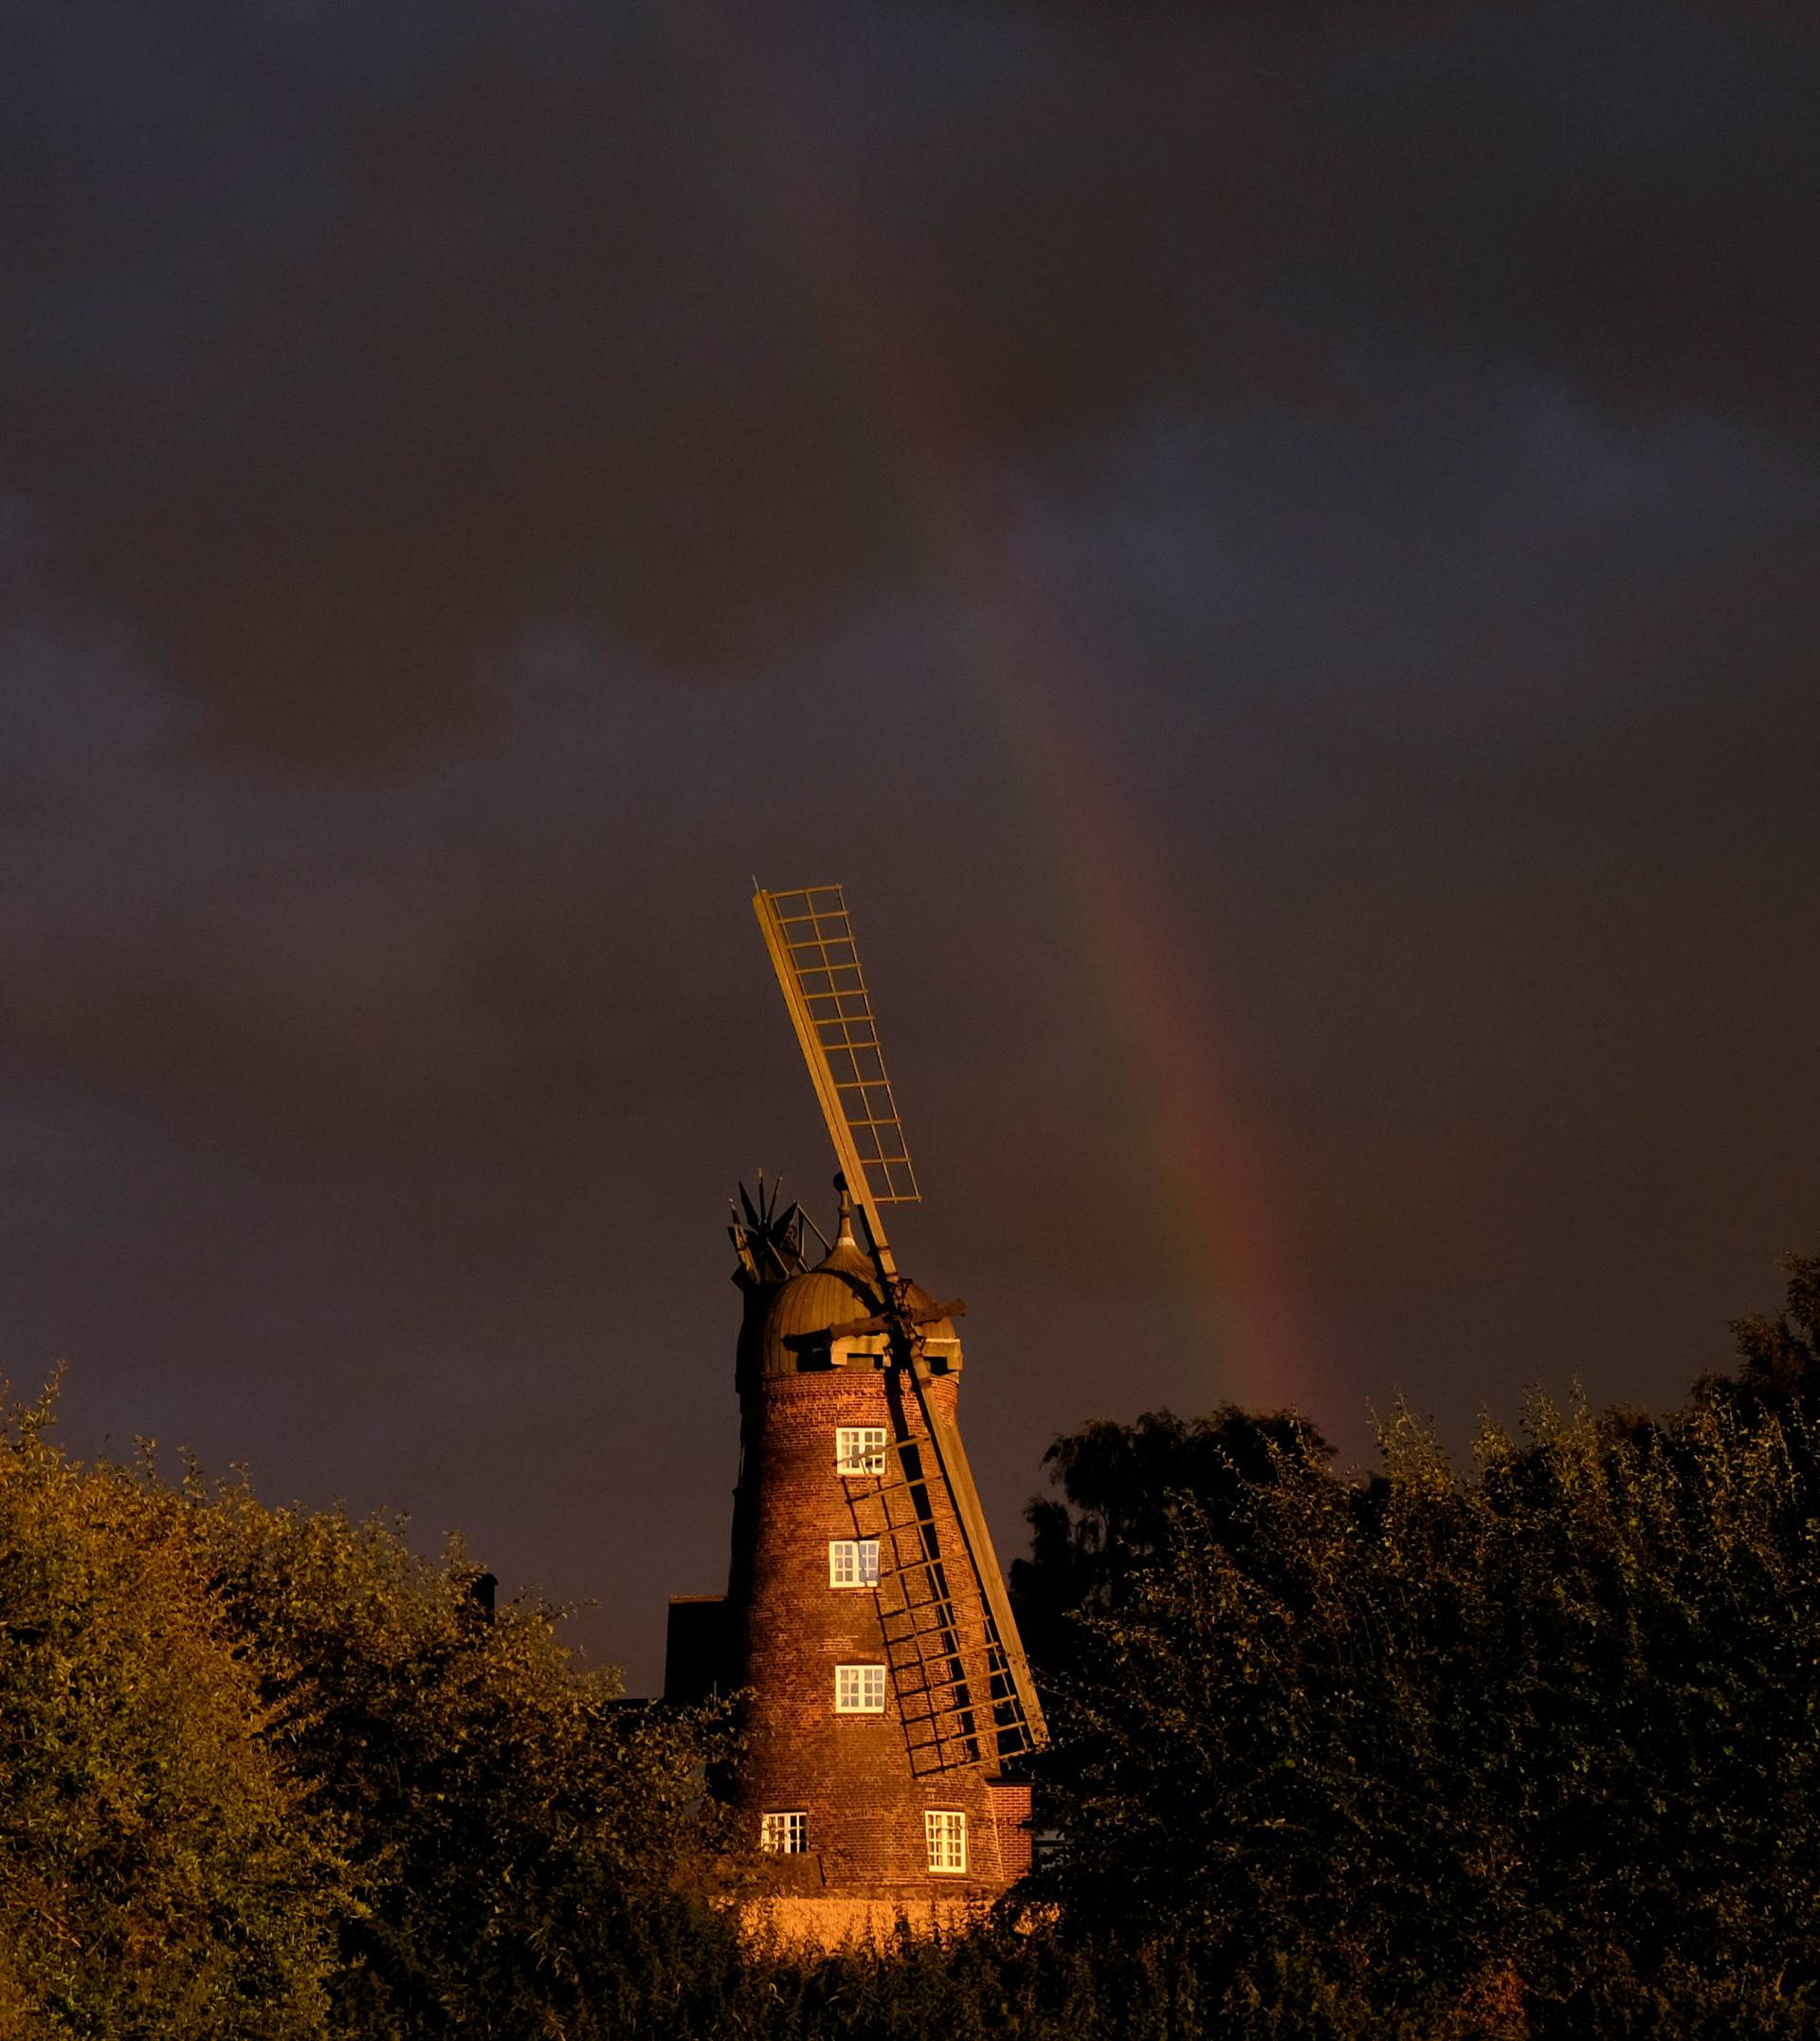 A rainbow forms over a windmill after rainfall in Shepshed